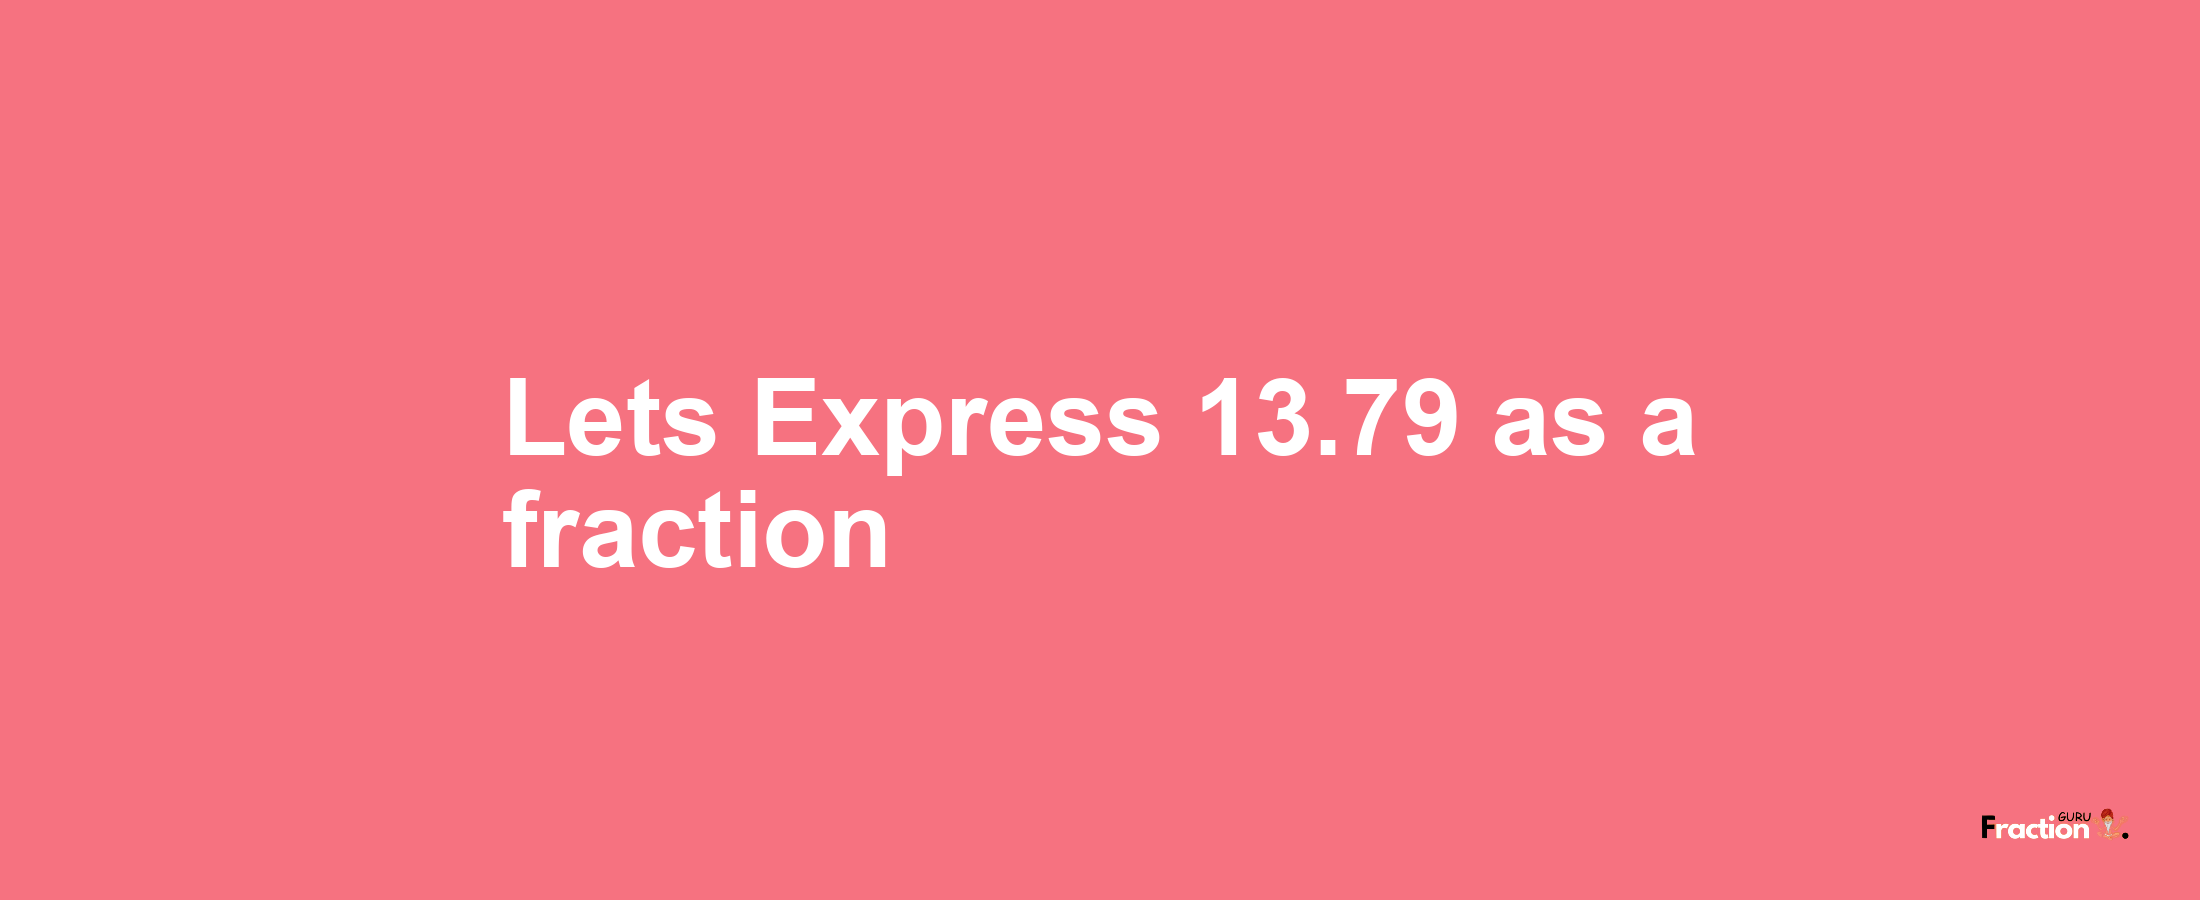 Lets Express 13.79 as afraction